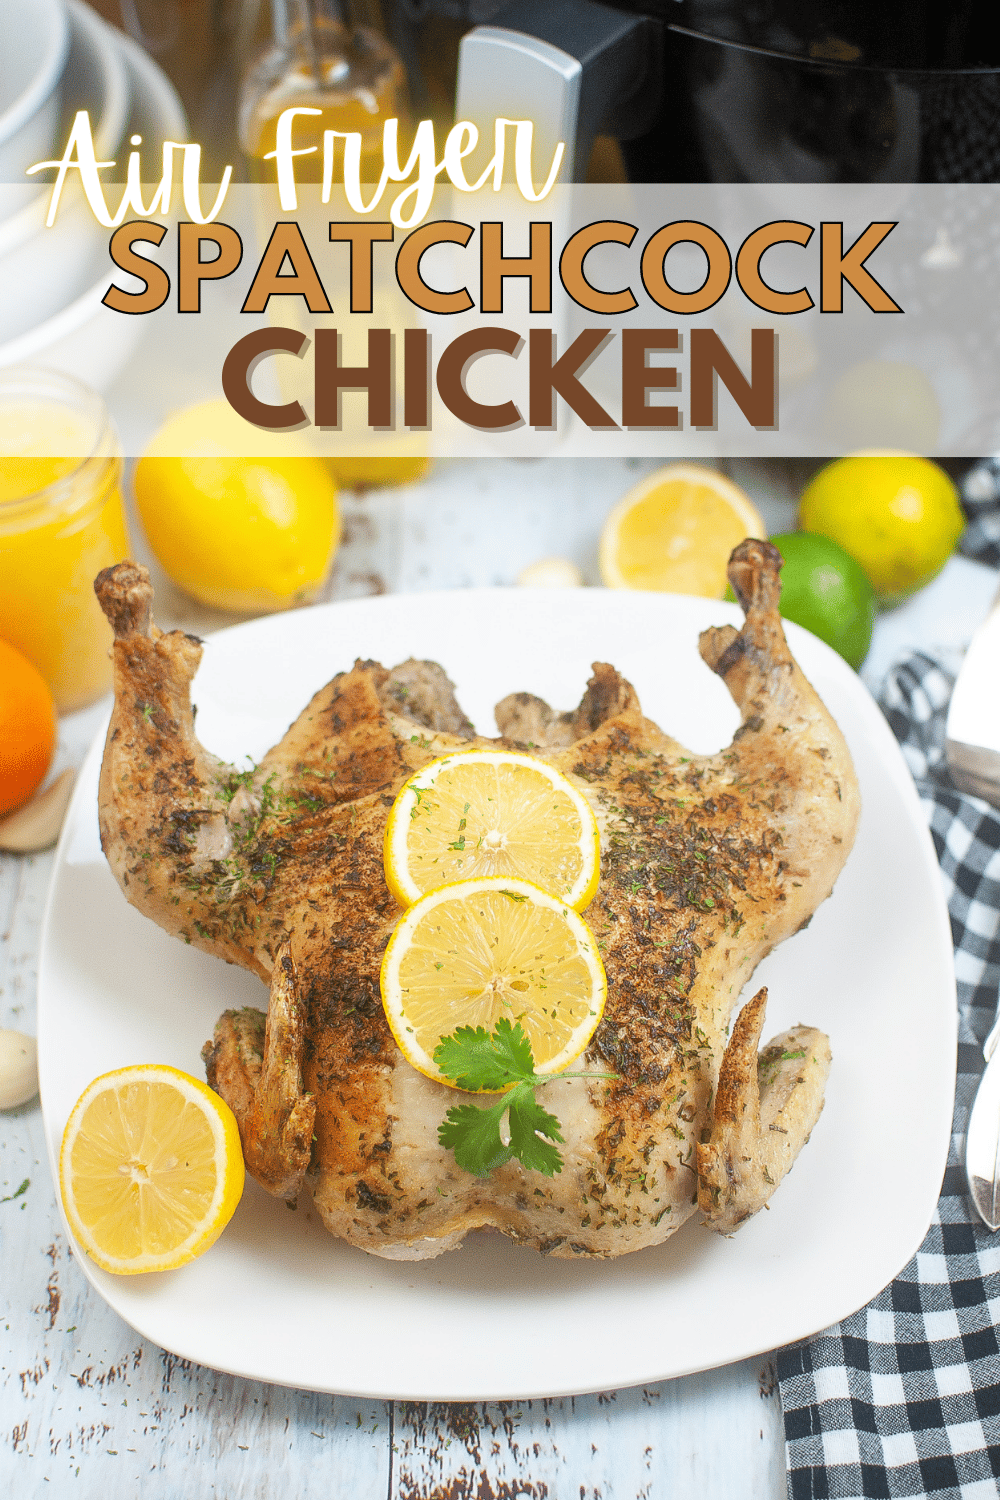 This Air Fryer Spatchcock Chicken is a great way to cook a whole chicken in under an hour. It's crispy on the outside and juicy on the inside. #airfryer #spatchcockchicken #wholechicken #chicken #spatchcock via @wondermomwannab